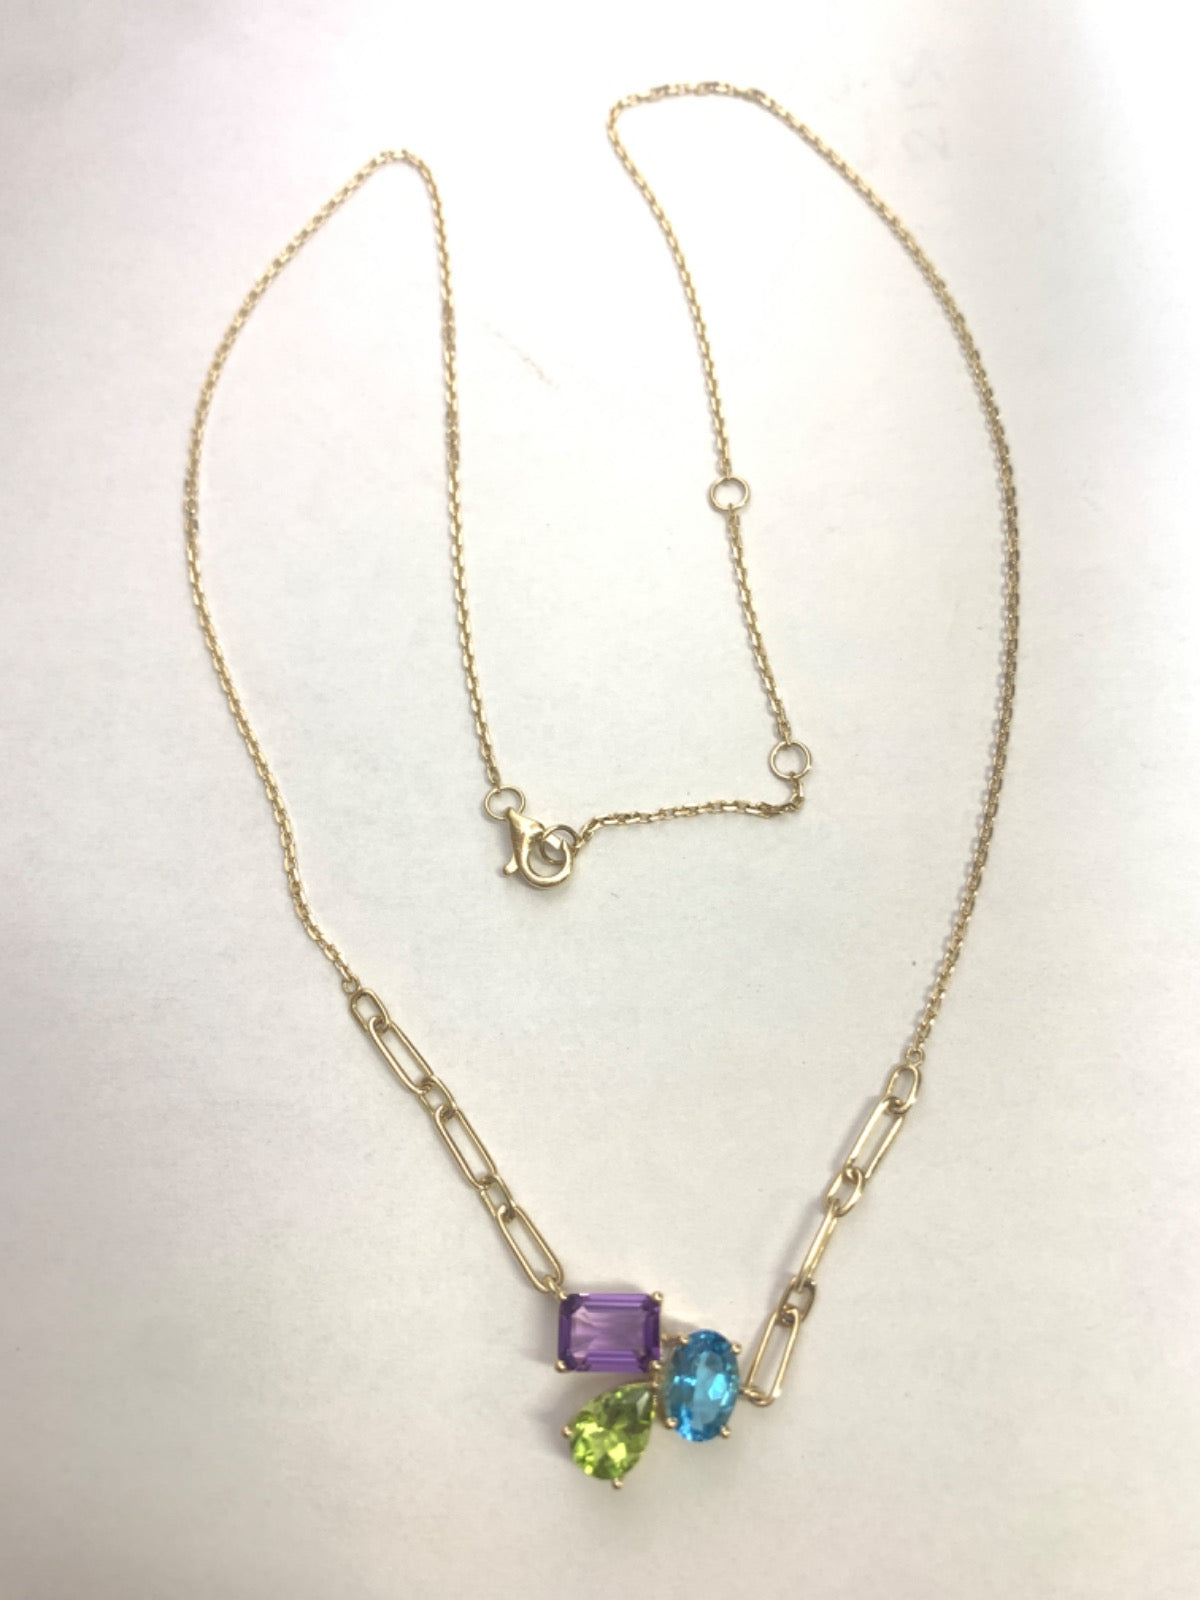 14K Yellow Gold  Chain with Peridot, Amethyst and Topaz